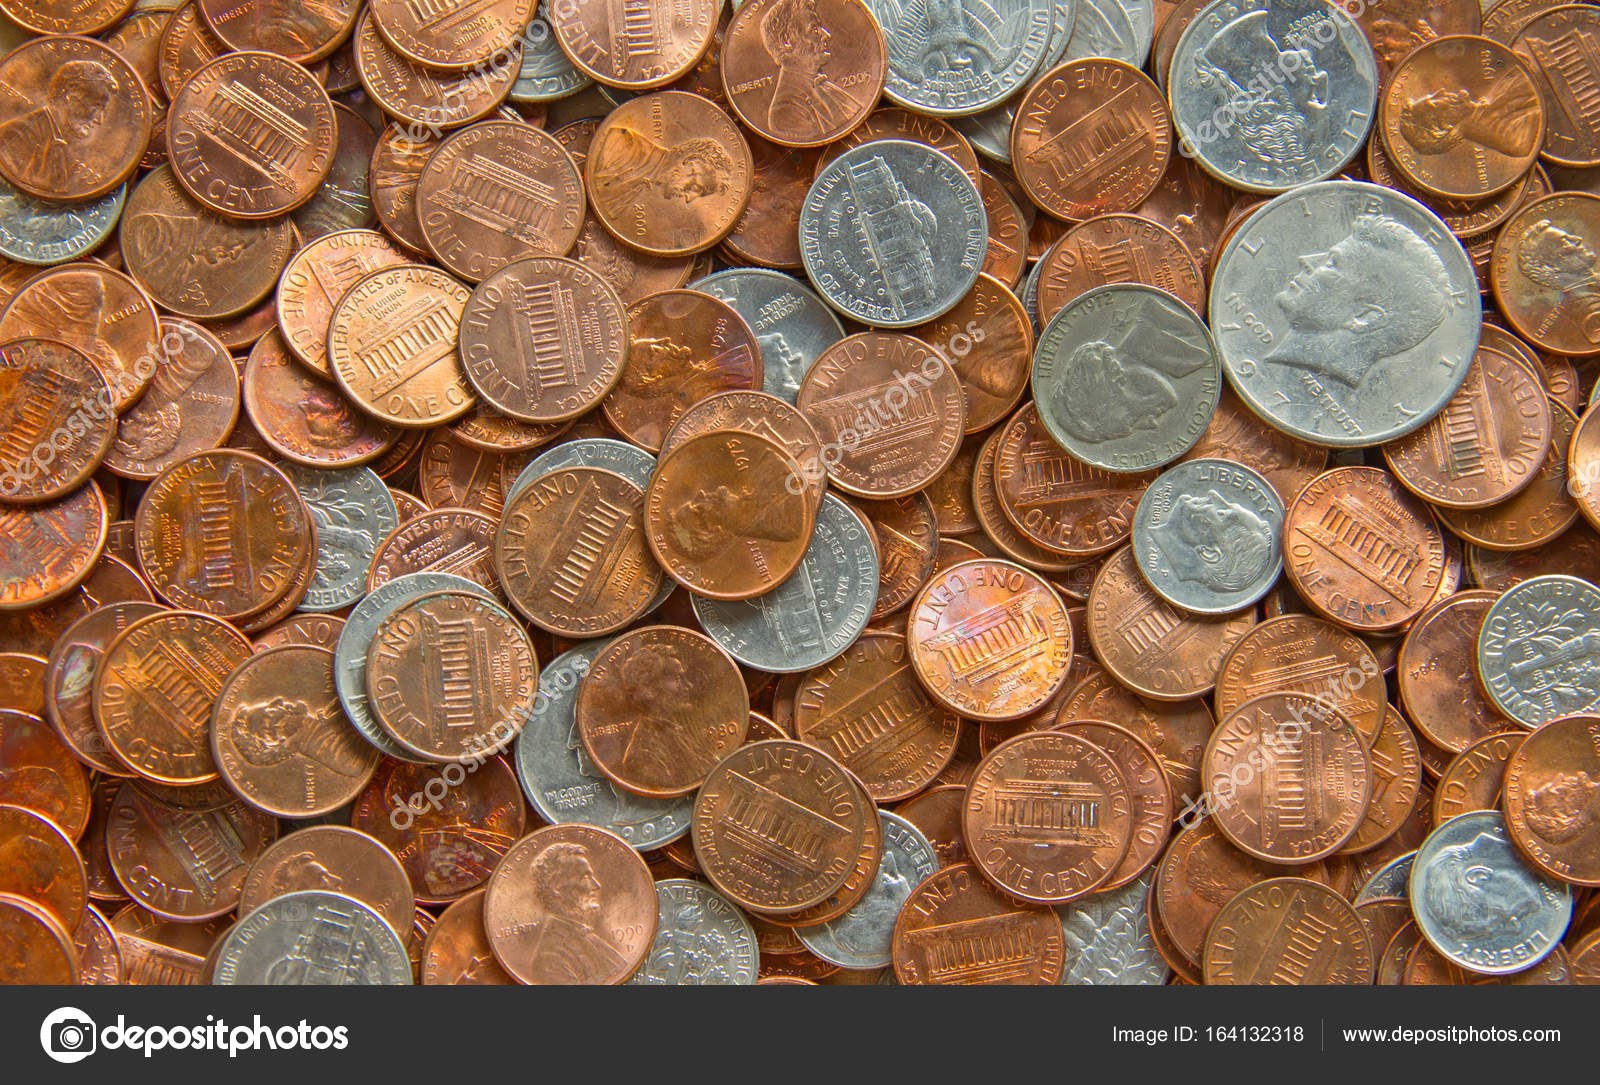 us coins images